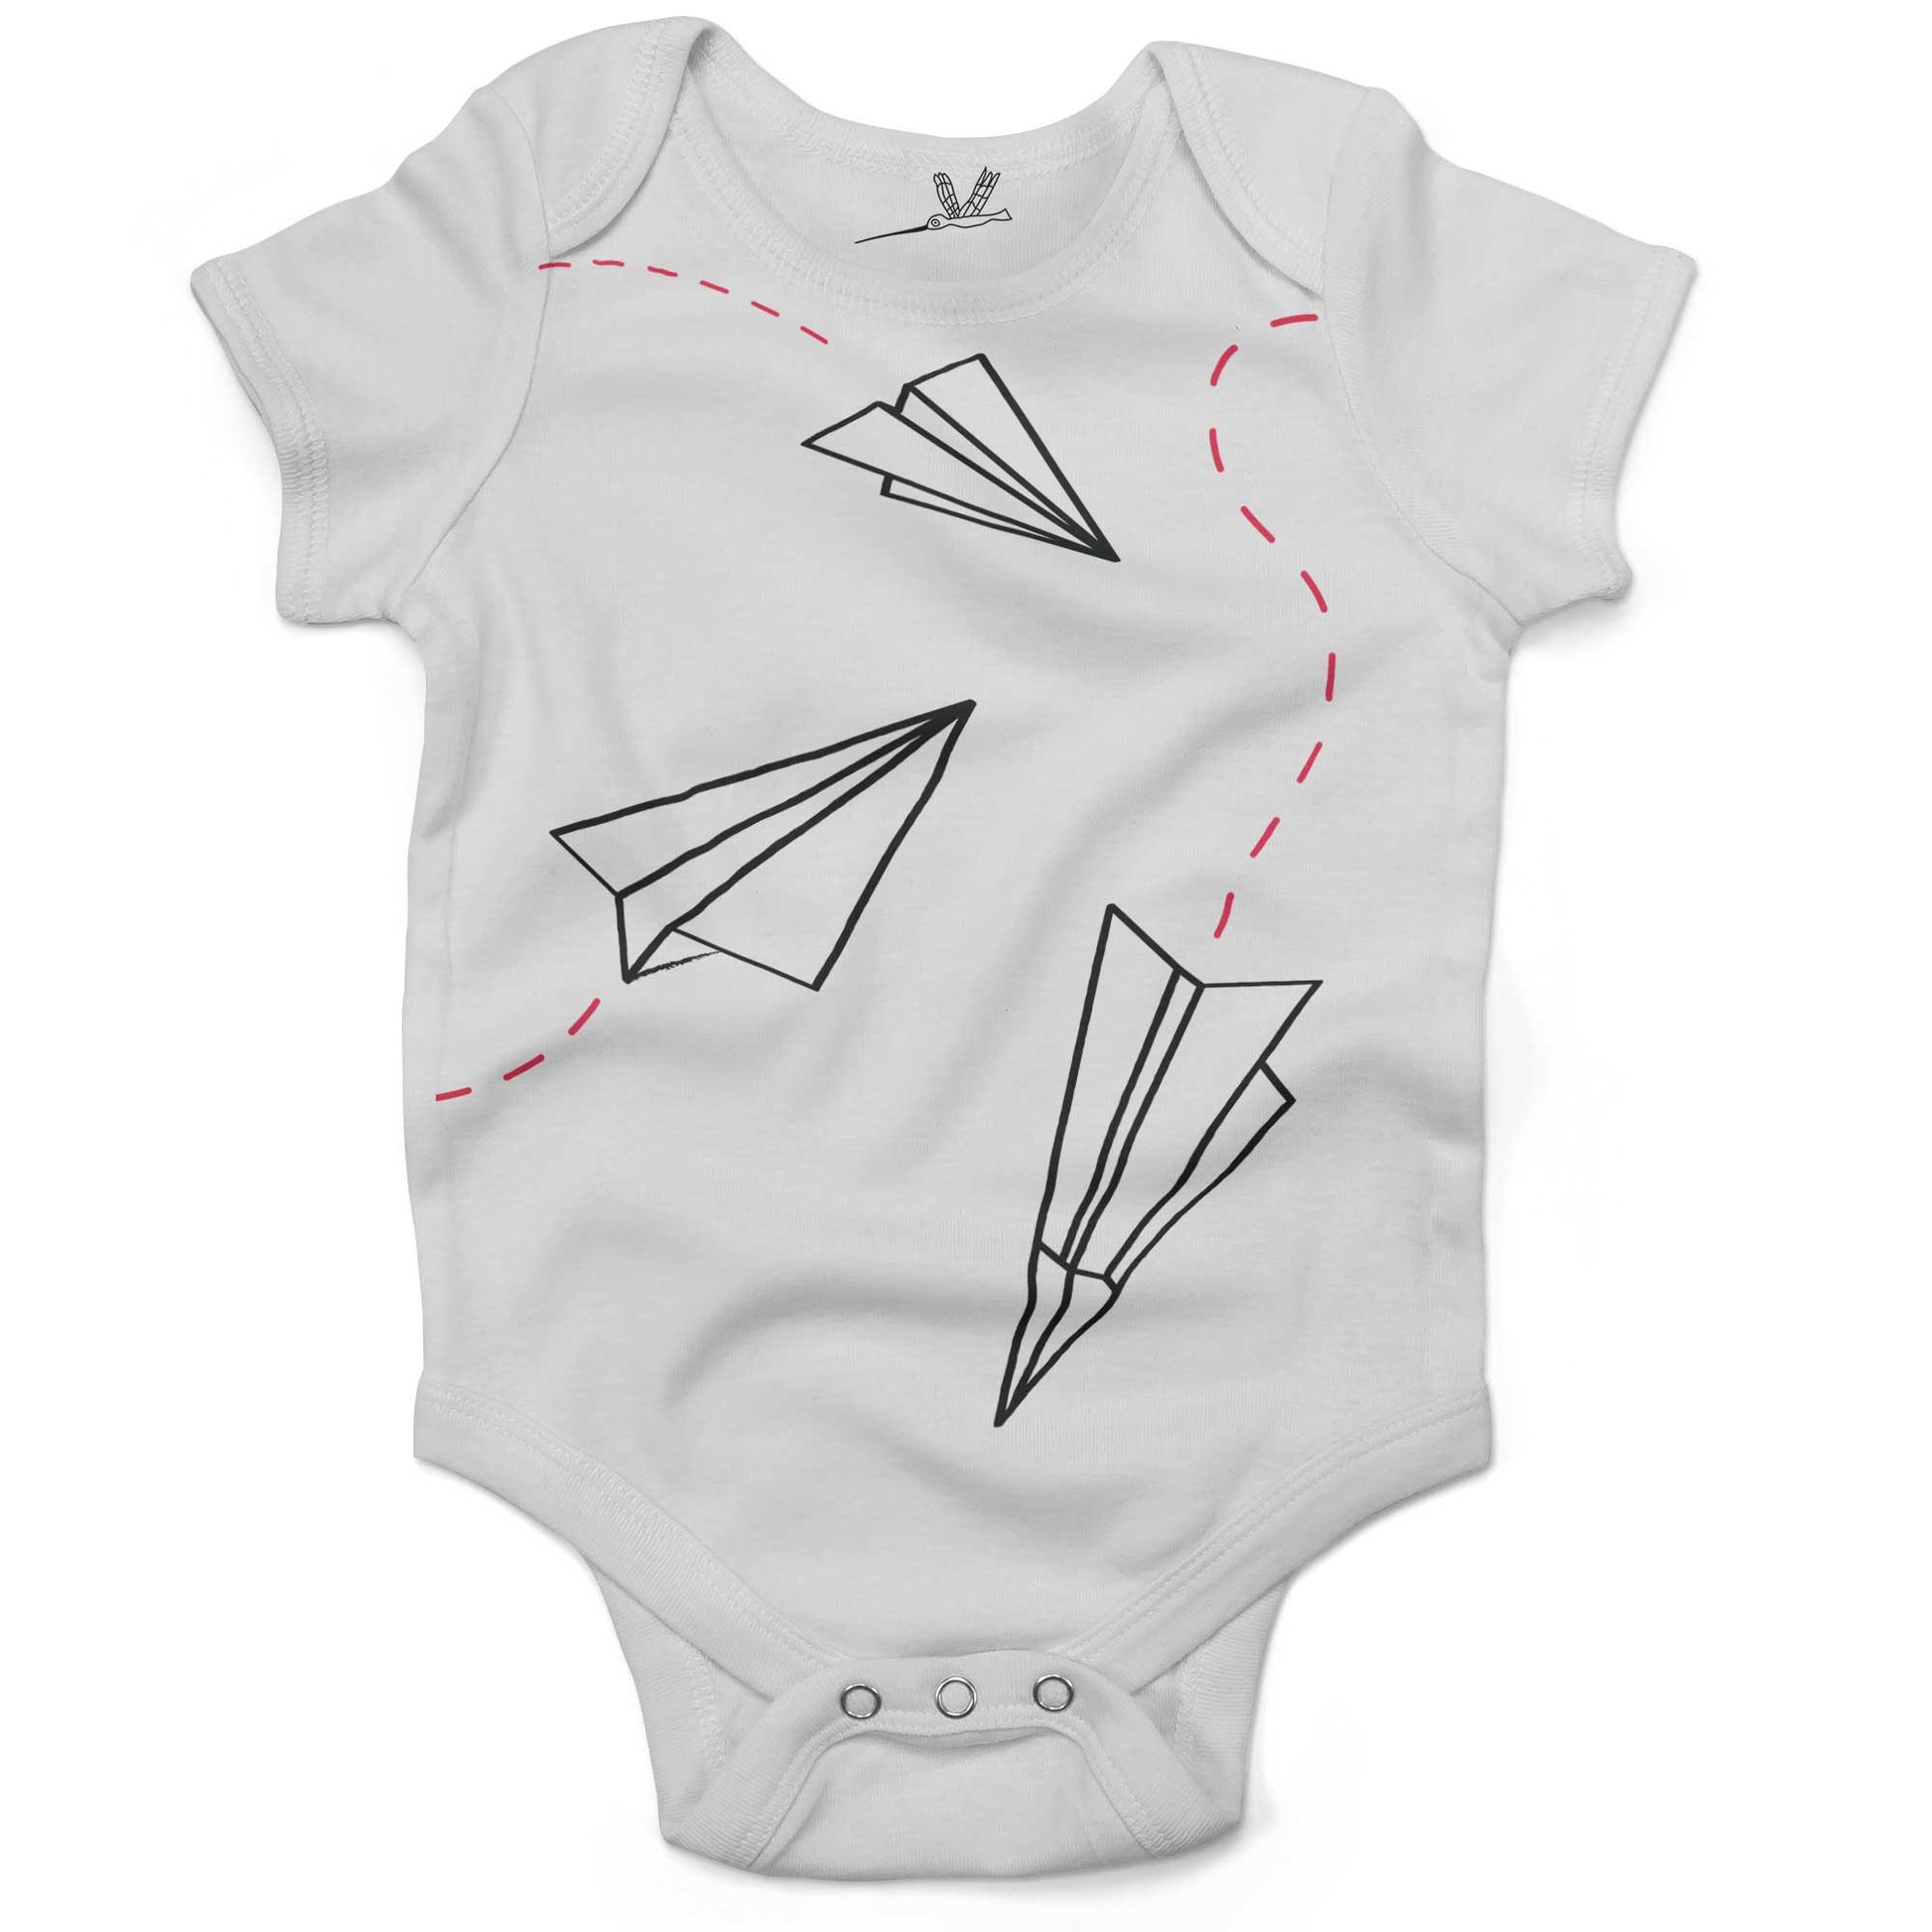 Paper Airplanes Infant Bodysuit or Raglan Baby Tee-White-3-6 months